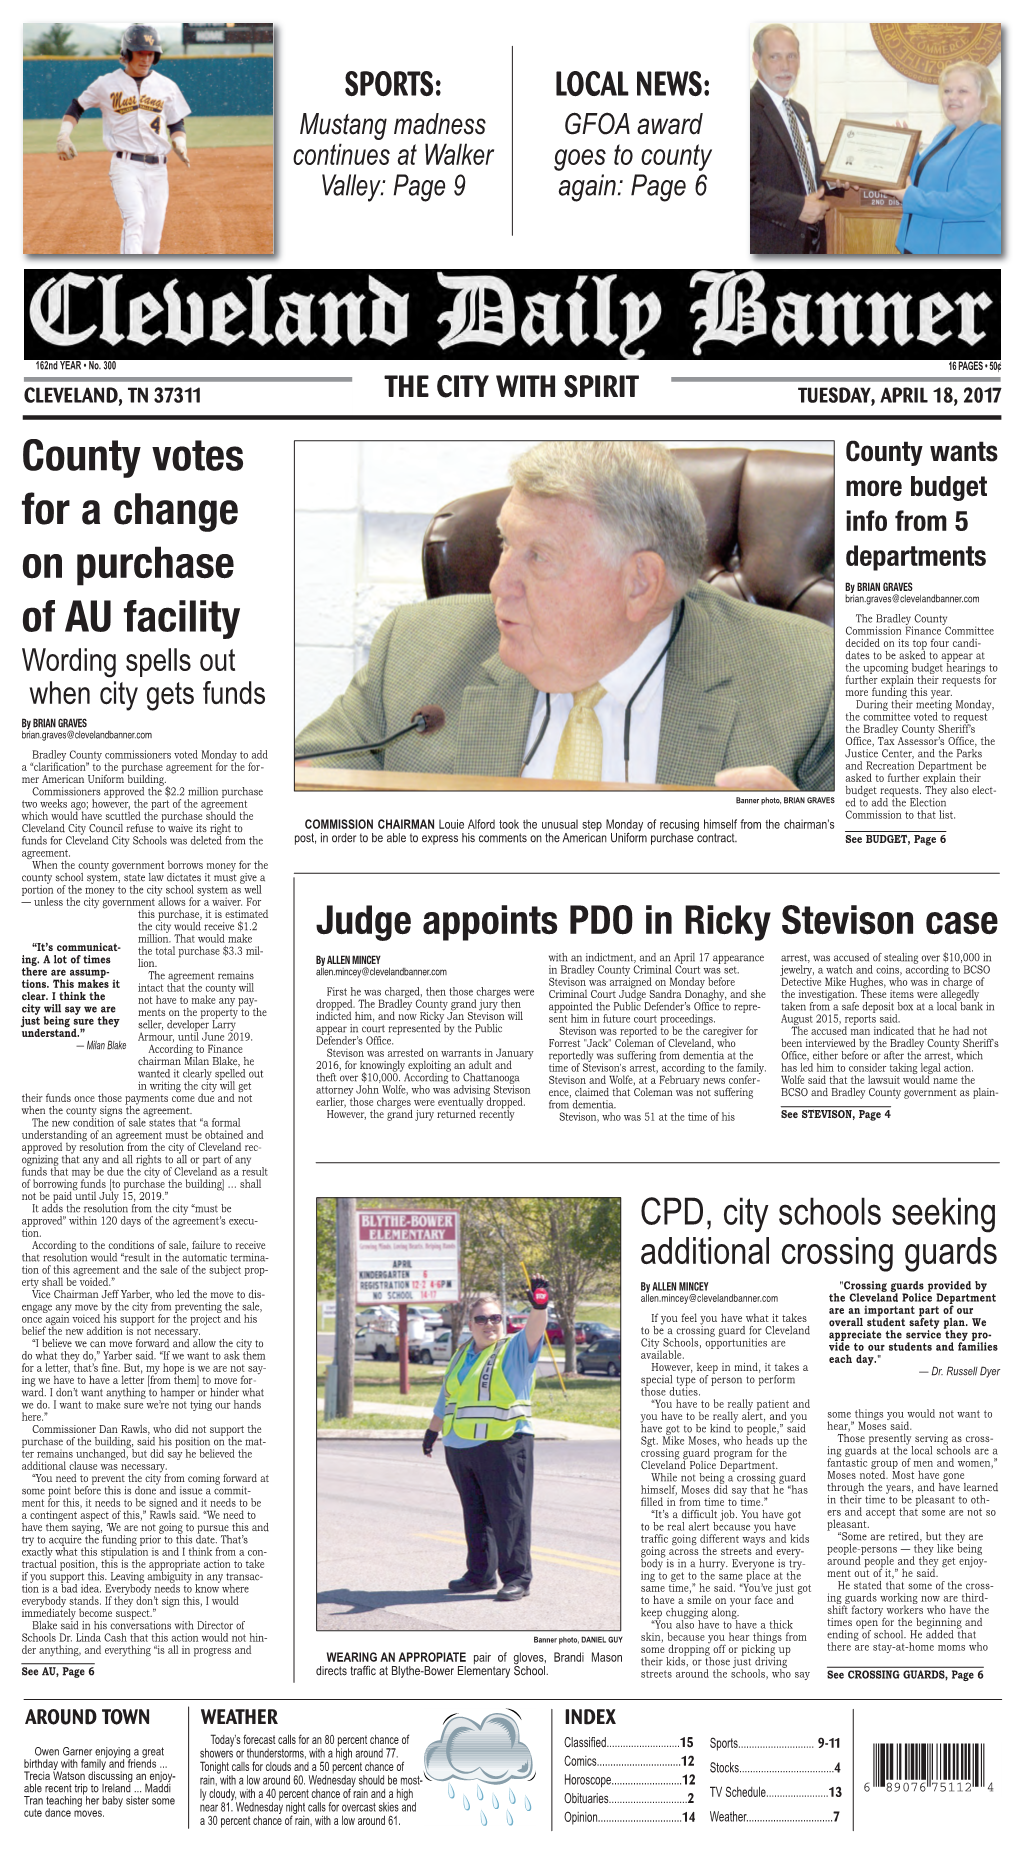 County Votes for a Change on Purchase of AU Facility